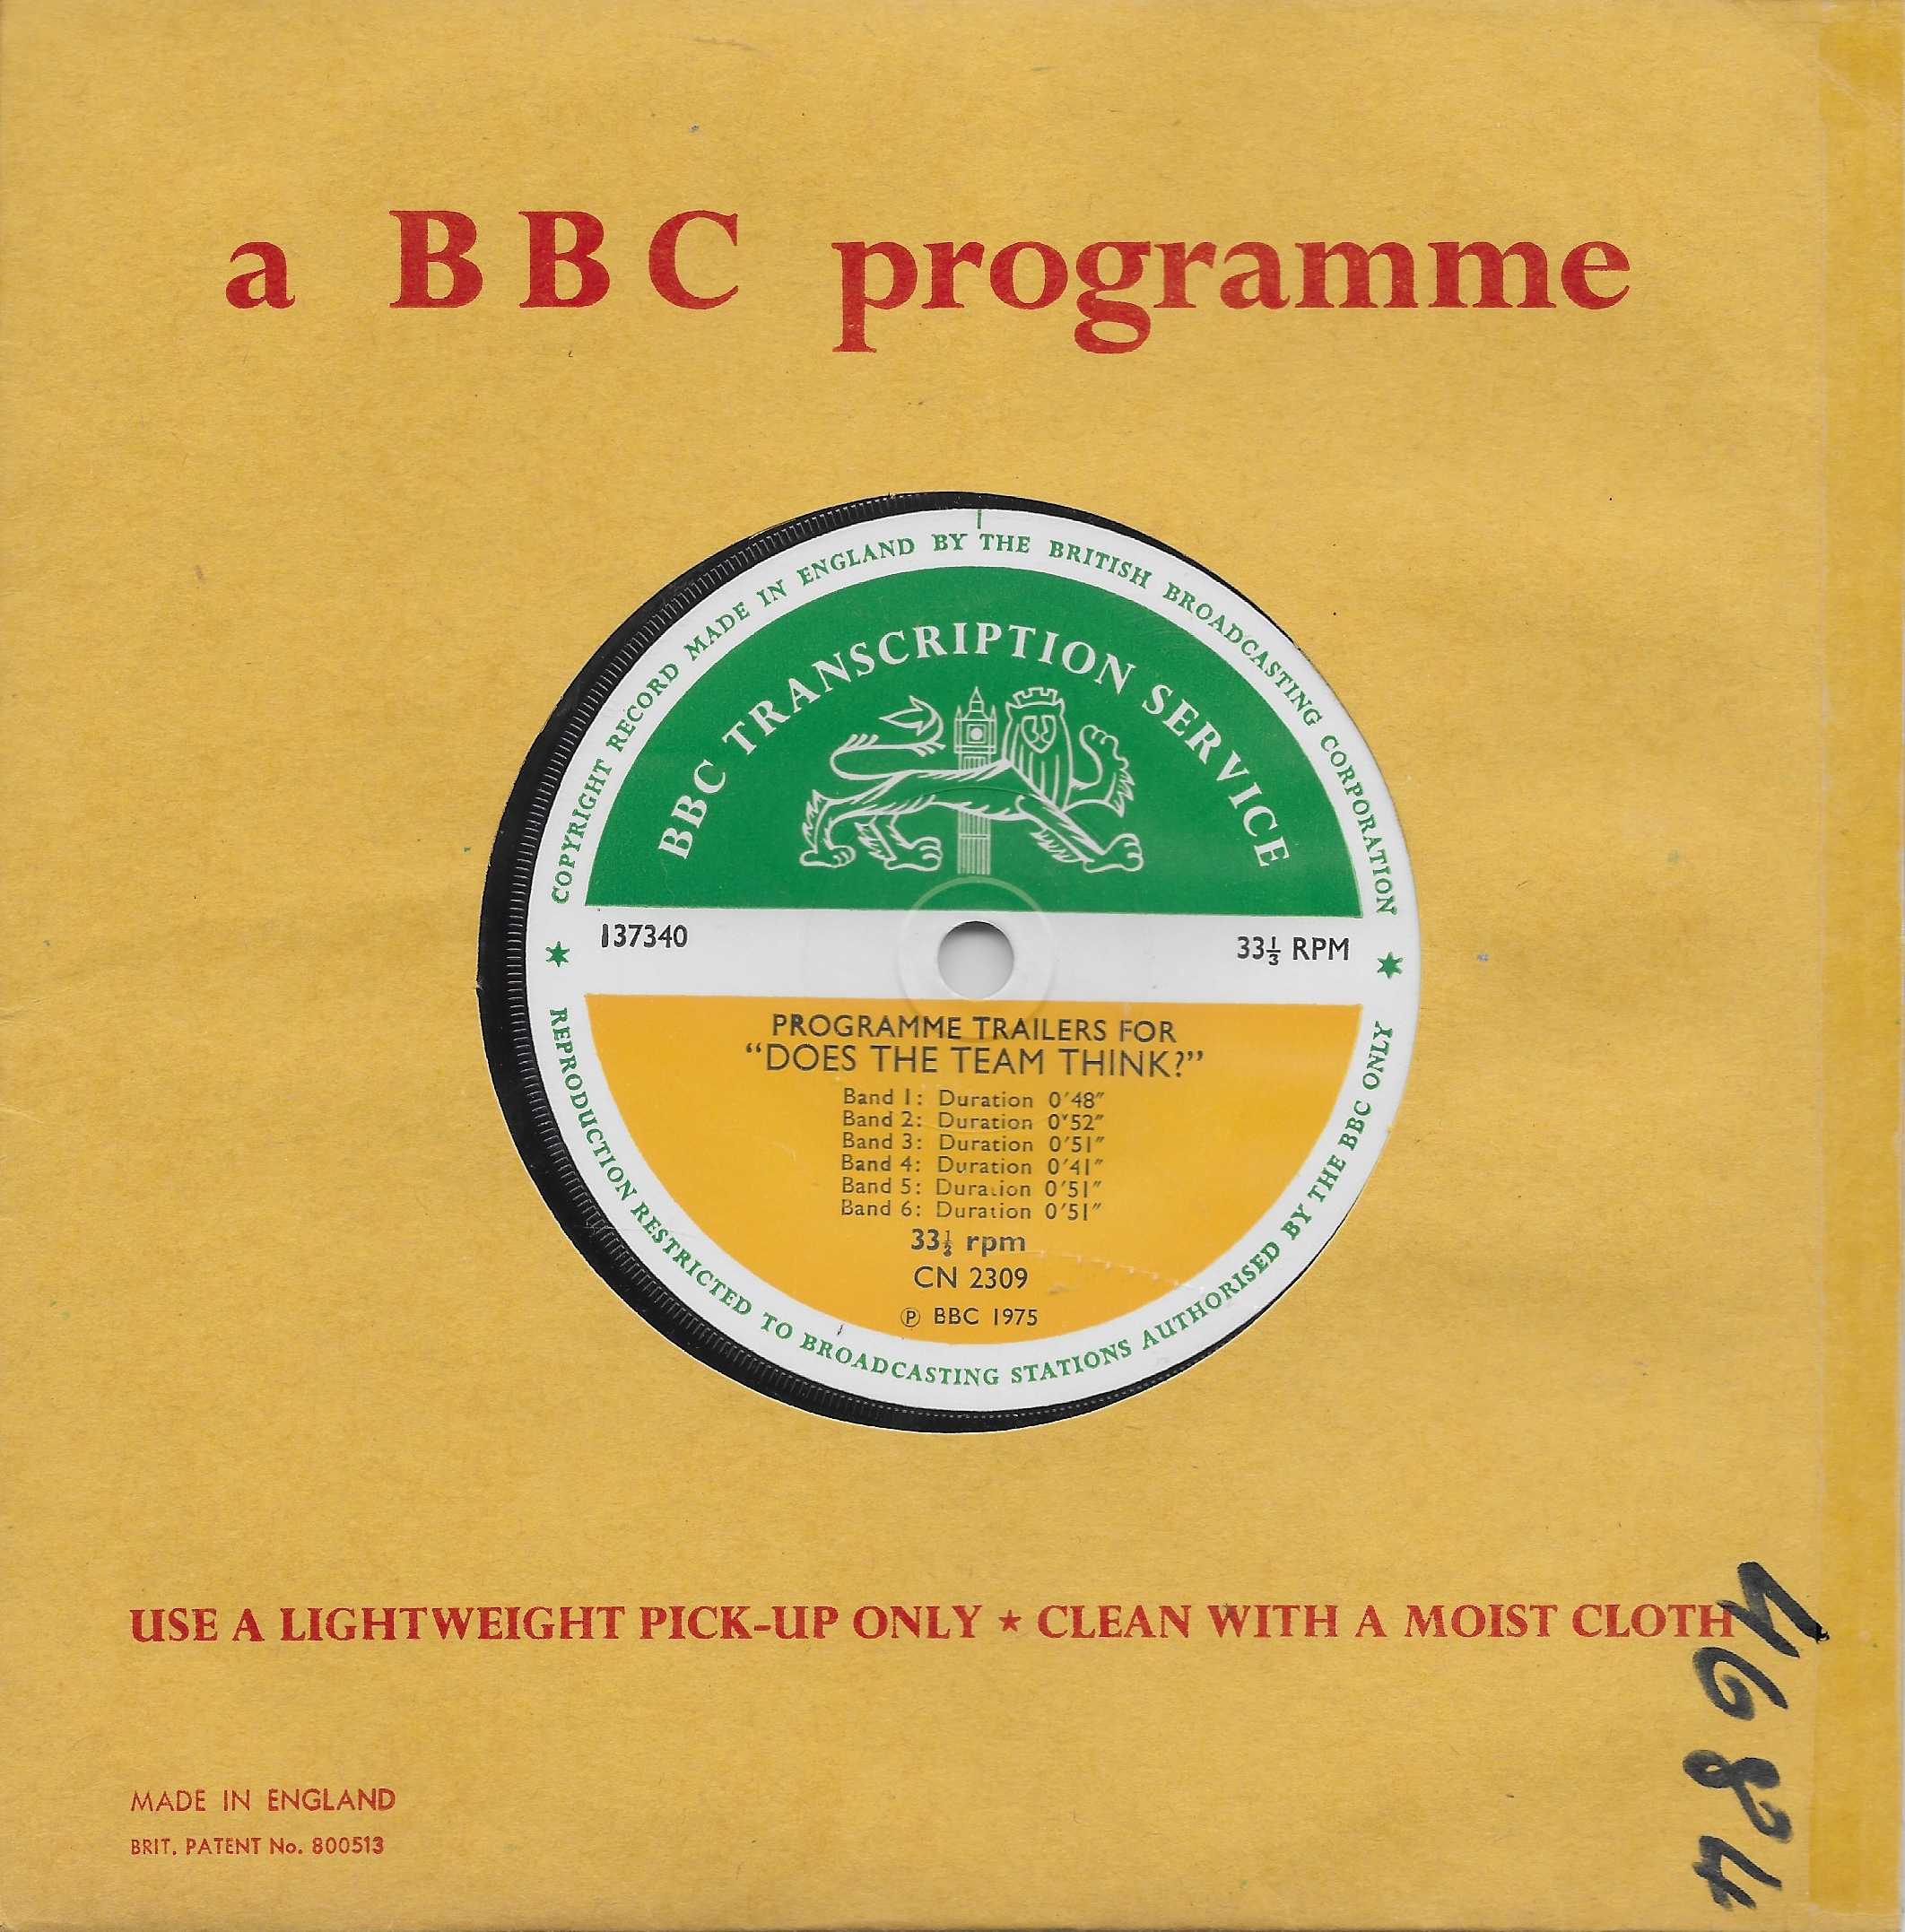 Picture of CN 2309 Programme trailers for "Does the team think?" by artist  from the BBC singles - Records and Tapes library